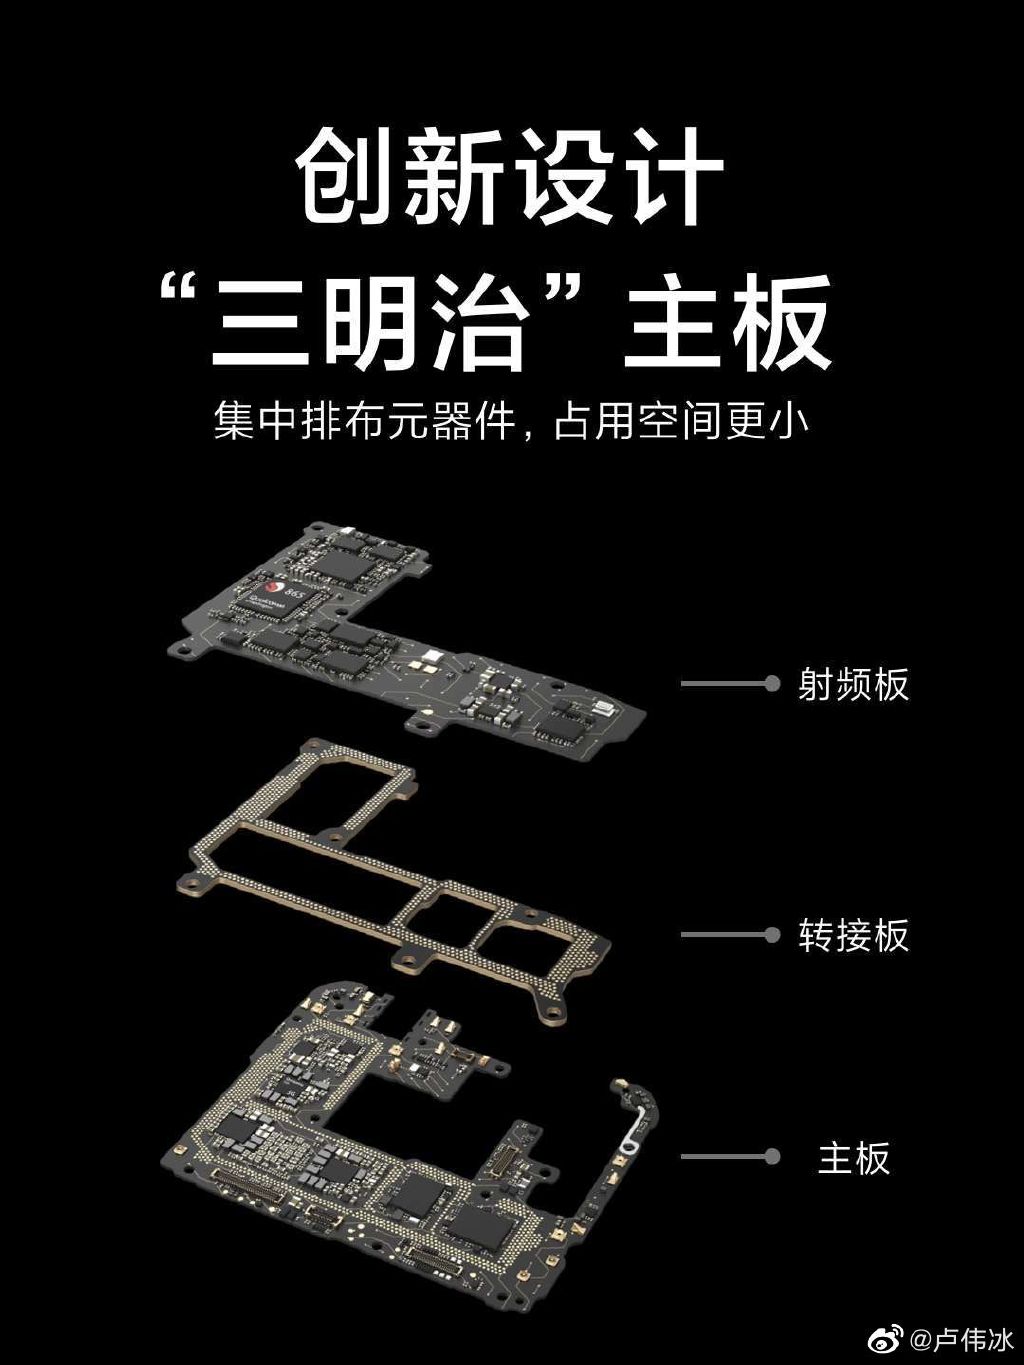 Redmi K30 Pro crams 61 components per sq centimeter with ‘Stacked Motherboard’ design 3